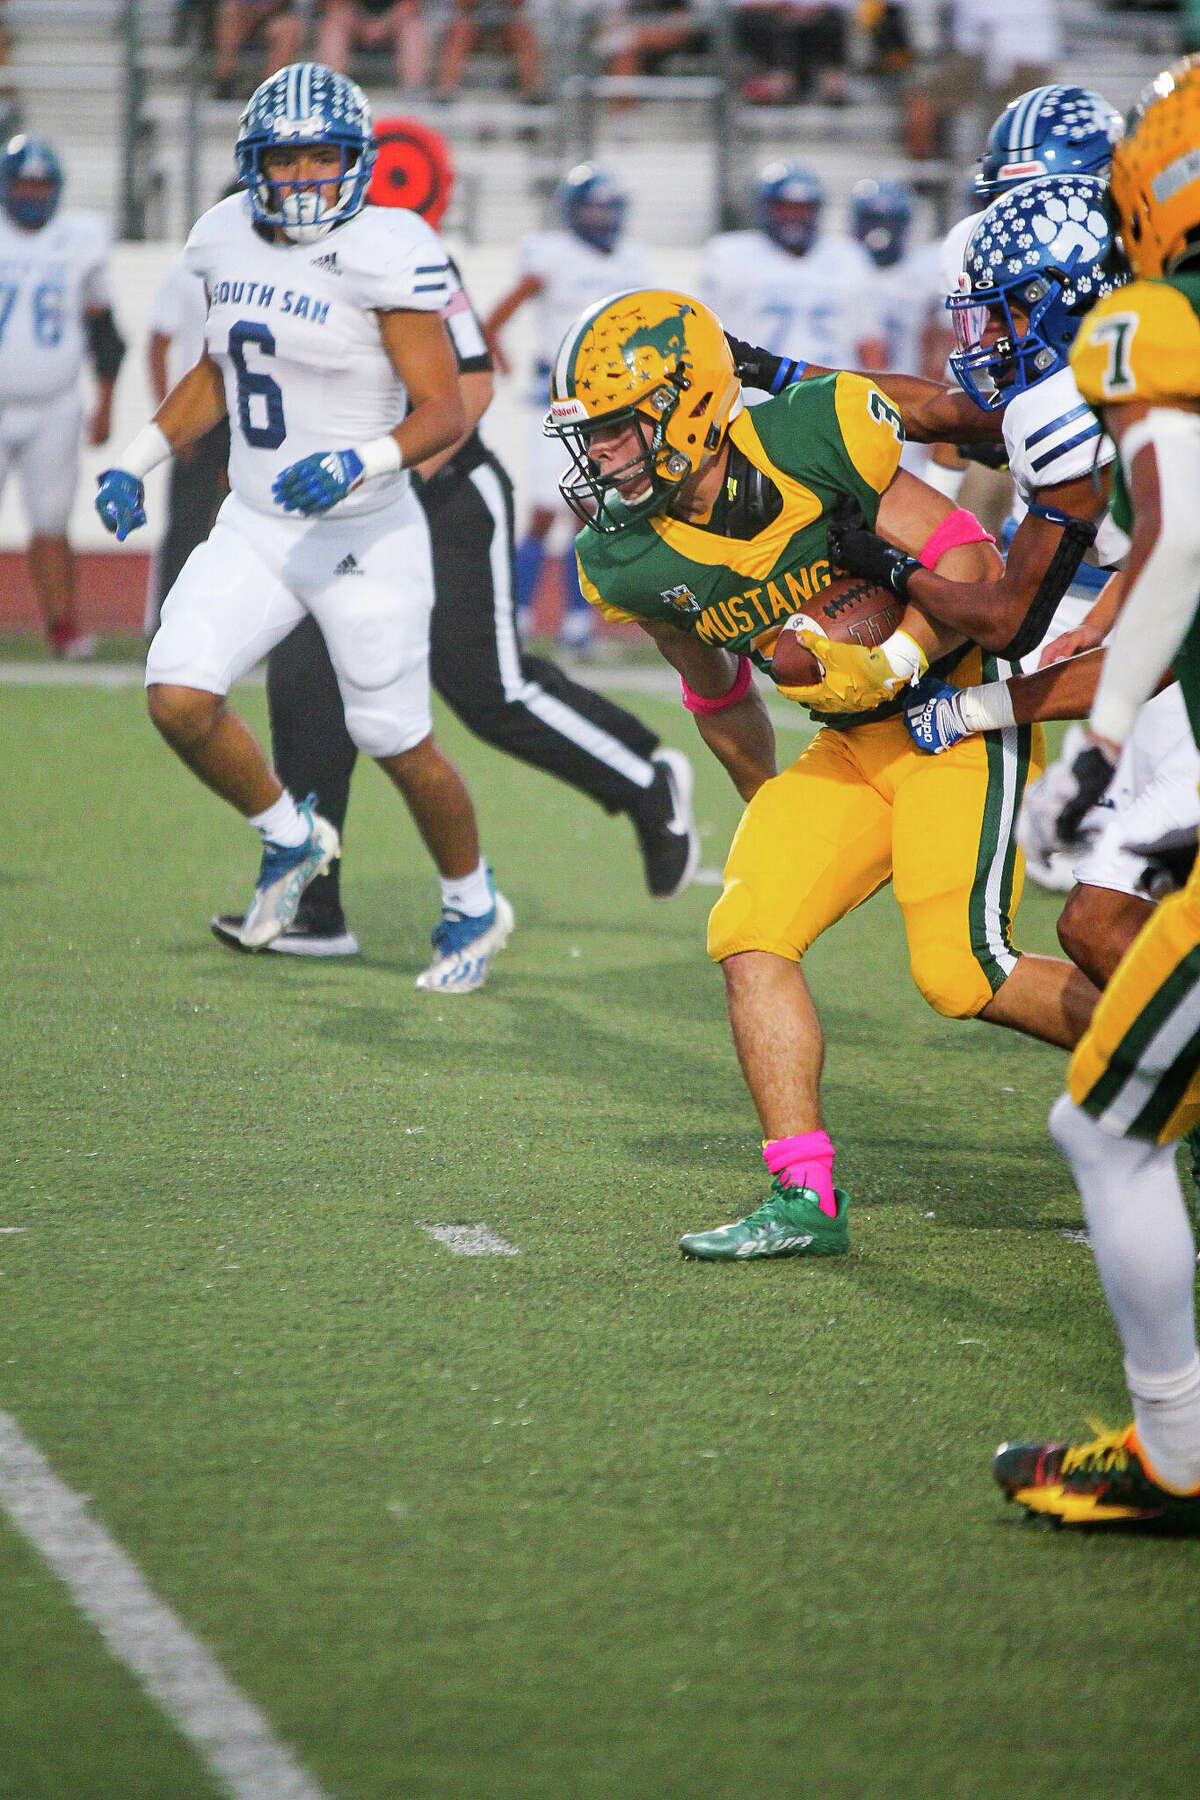 Ben Limon rushed for 211 yards and five touchdowns in last Friday's win over South San Antonio.